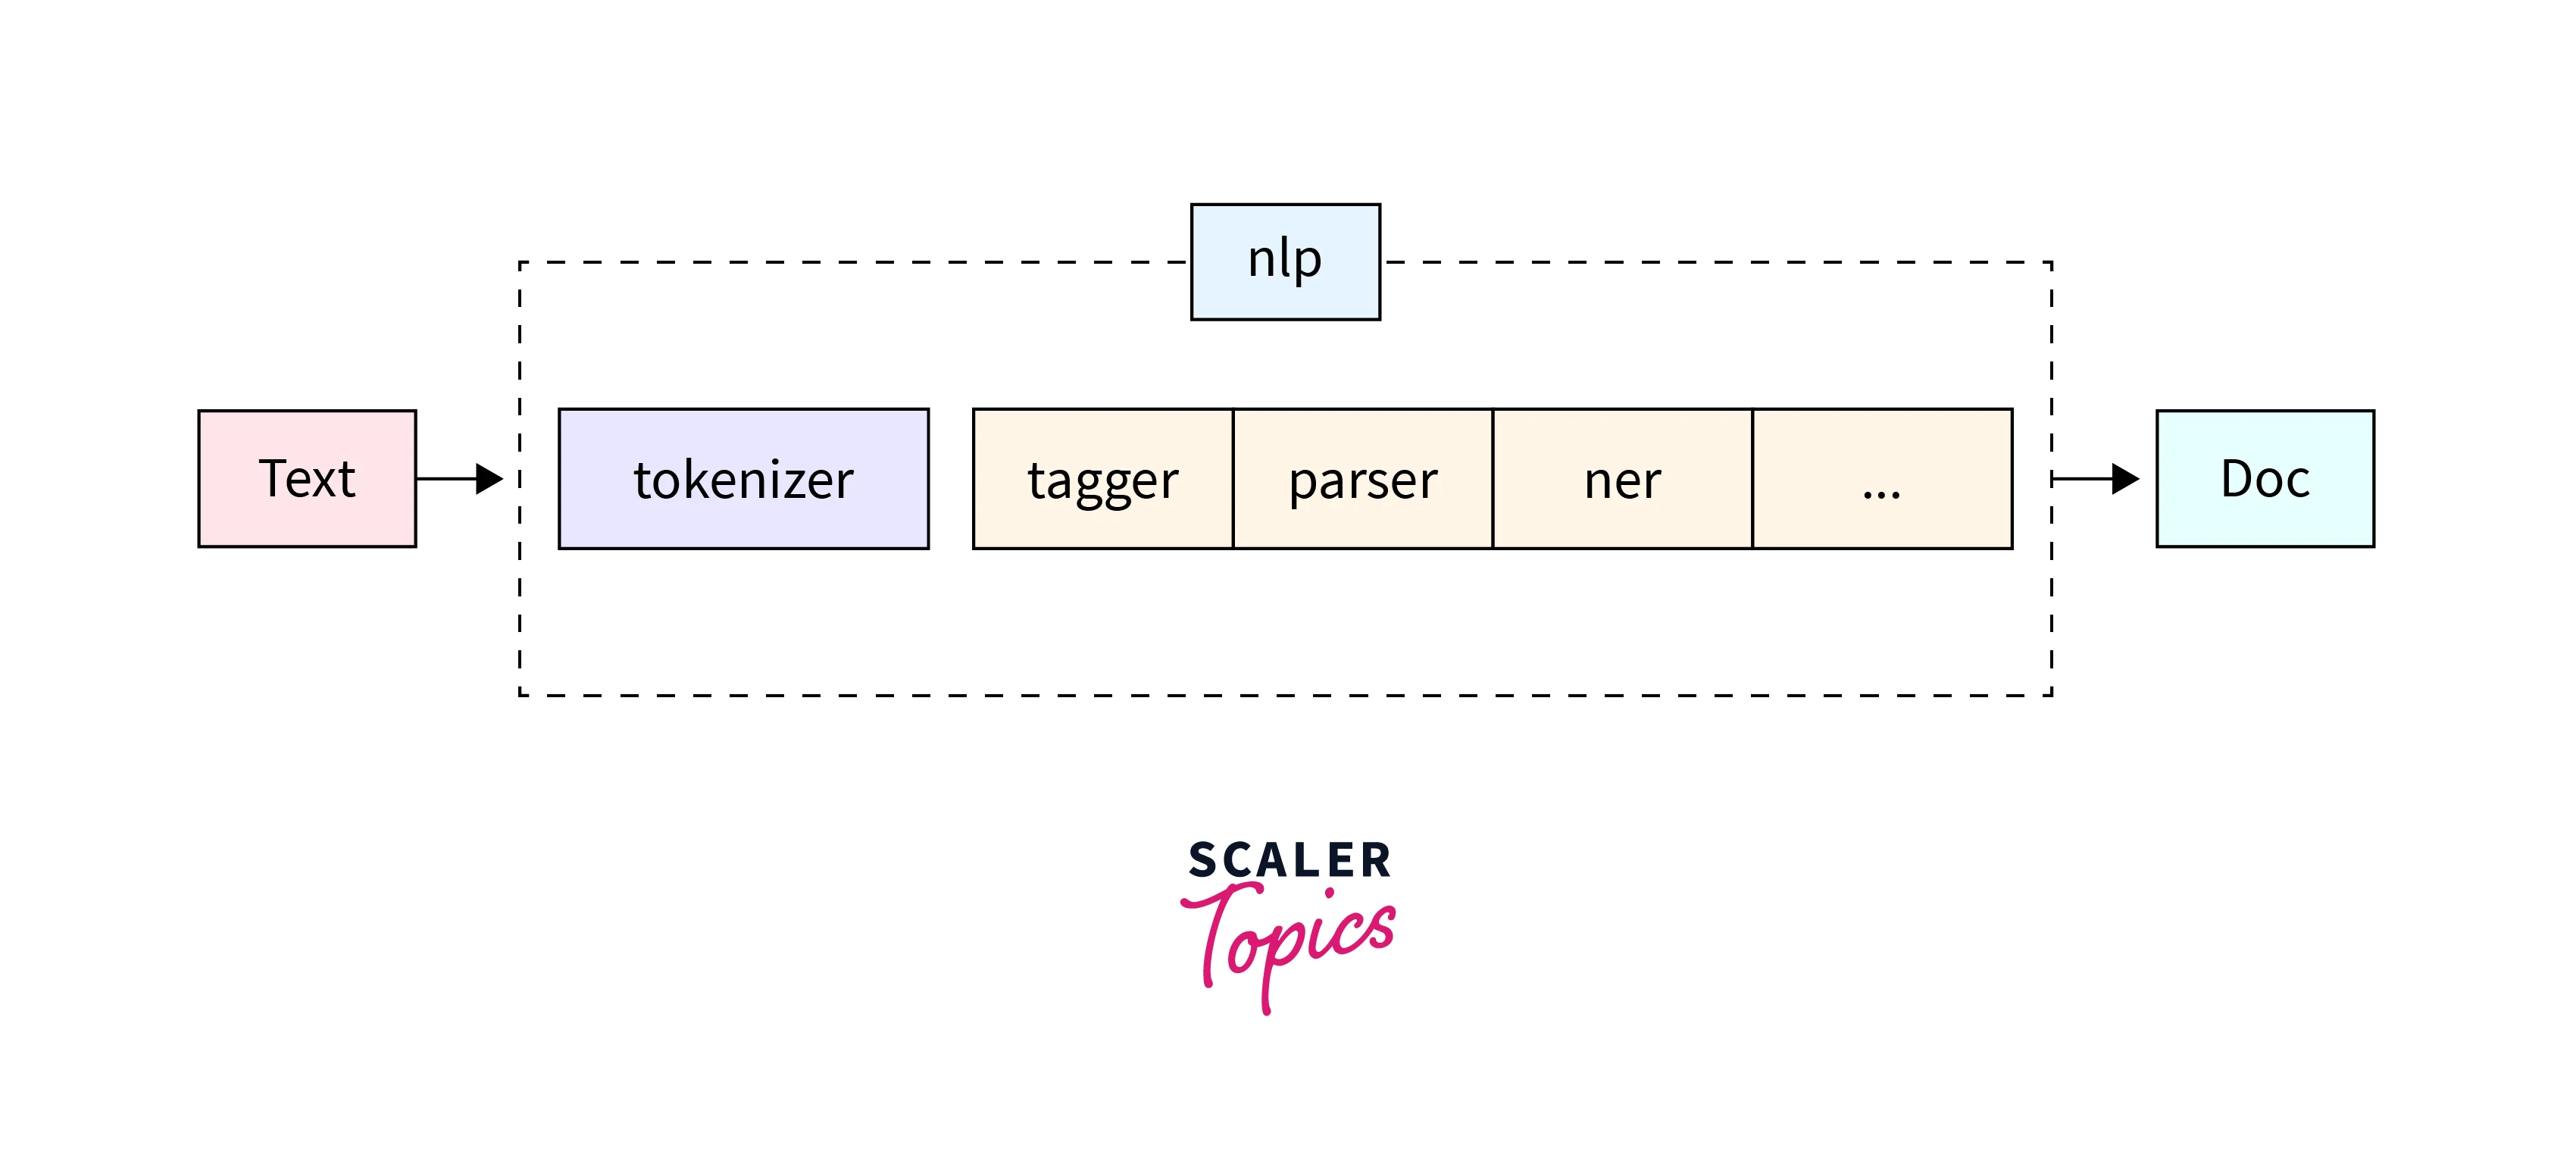 What does the nlp Object do